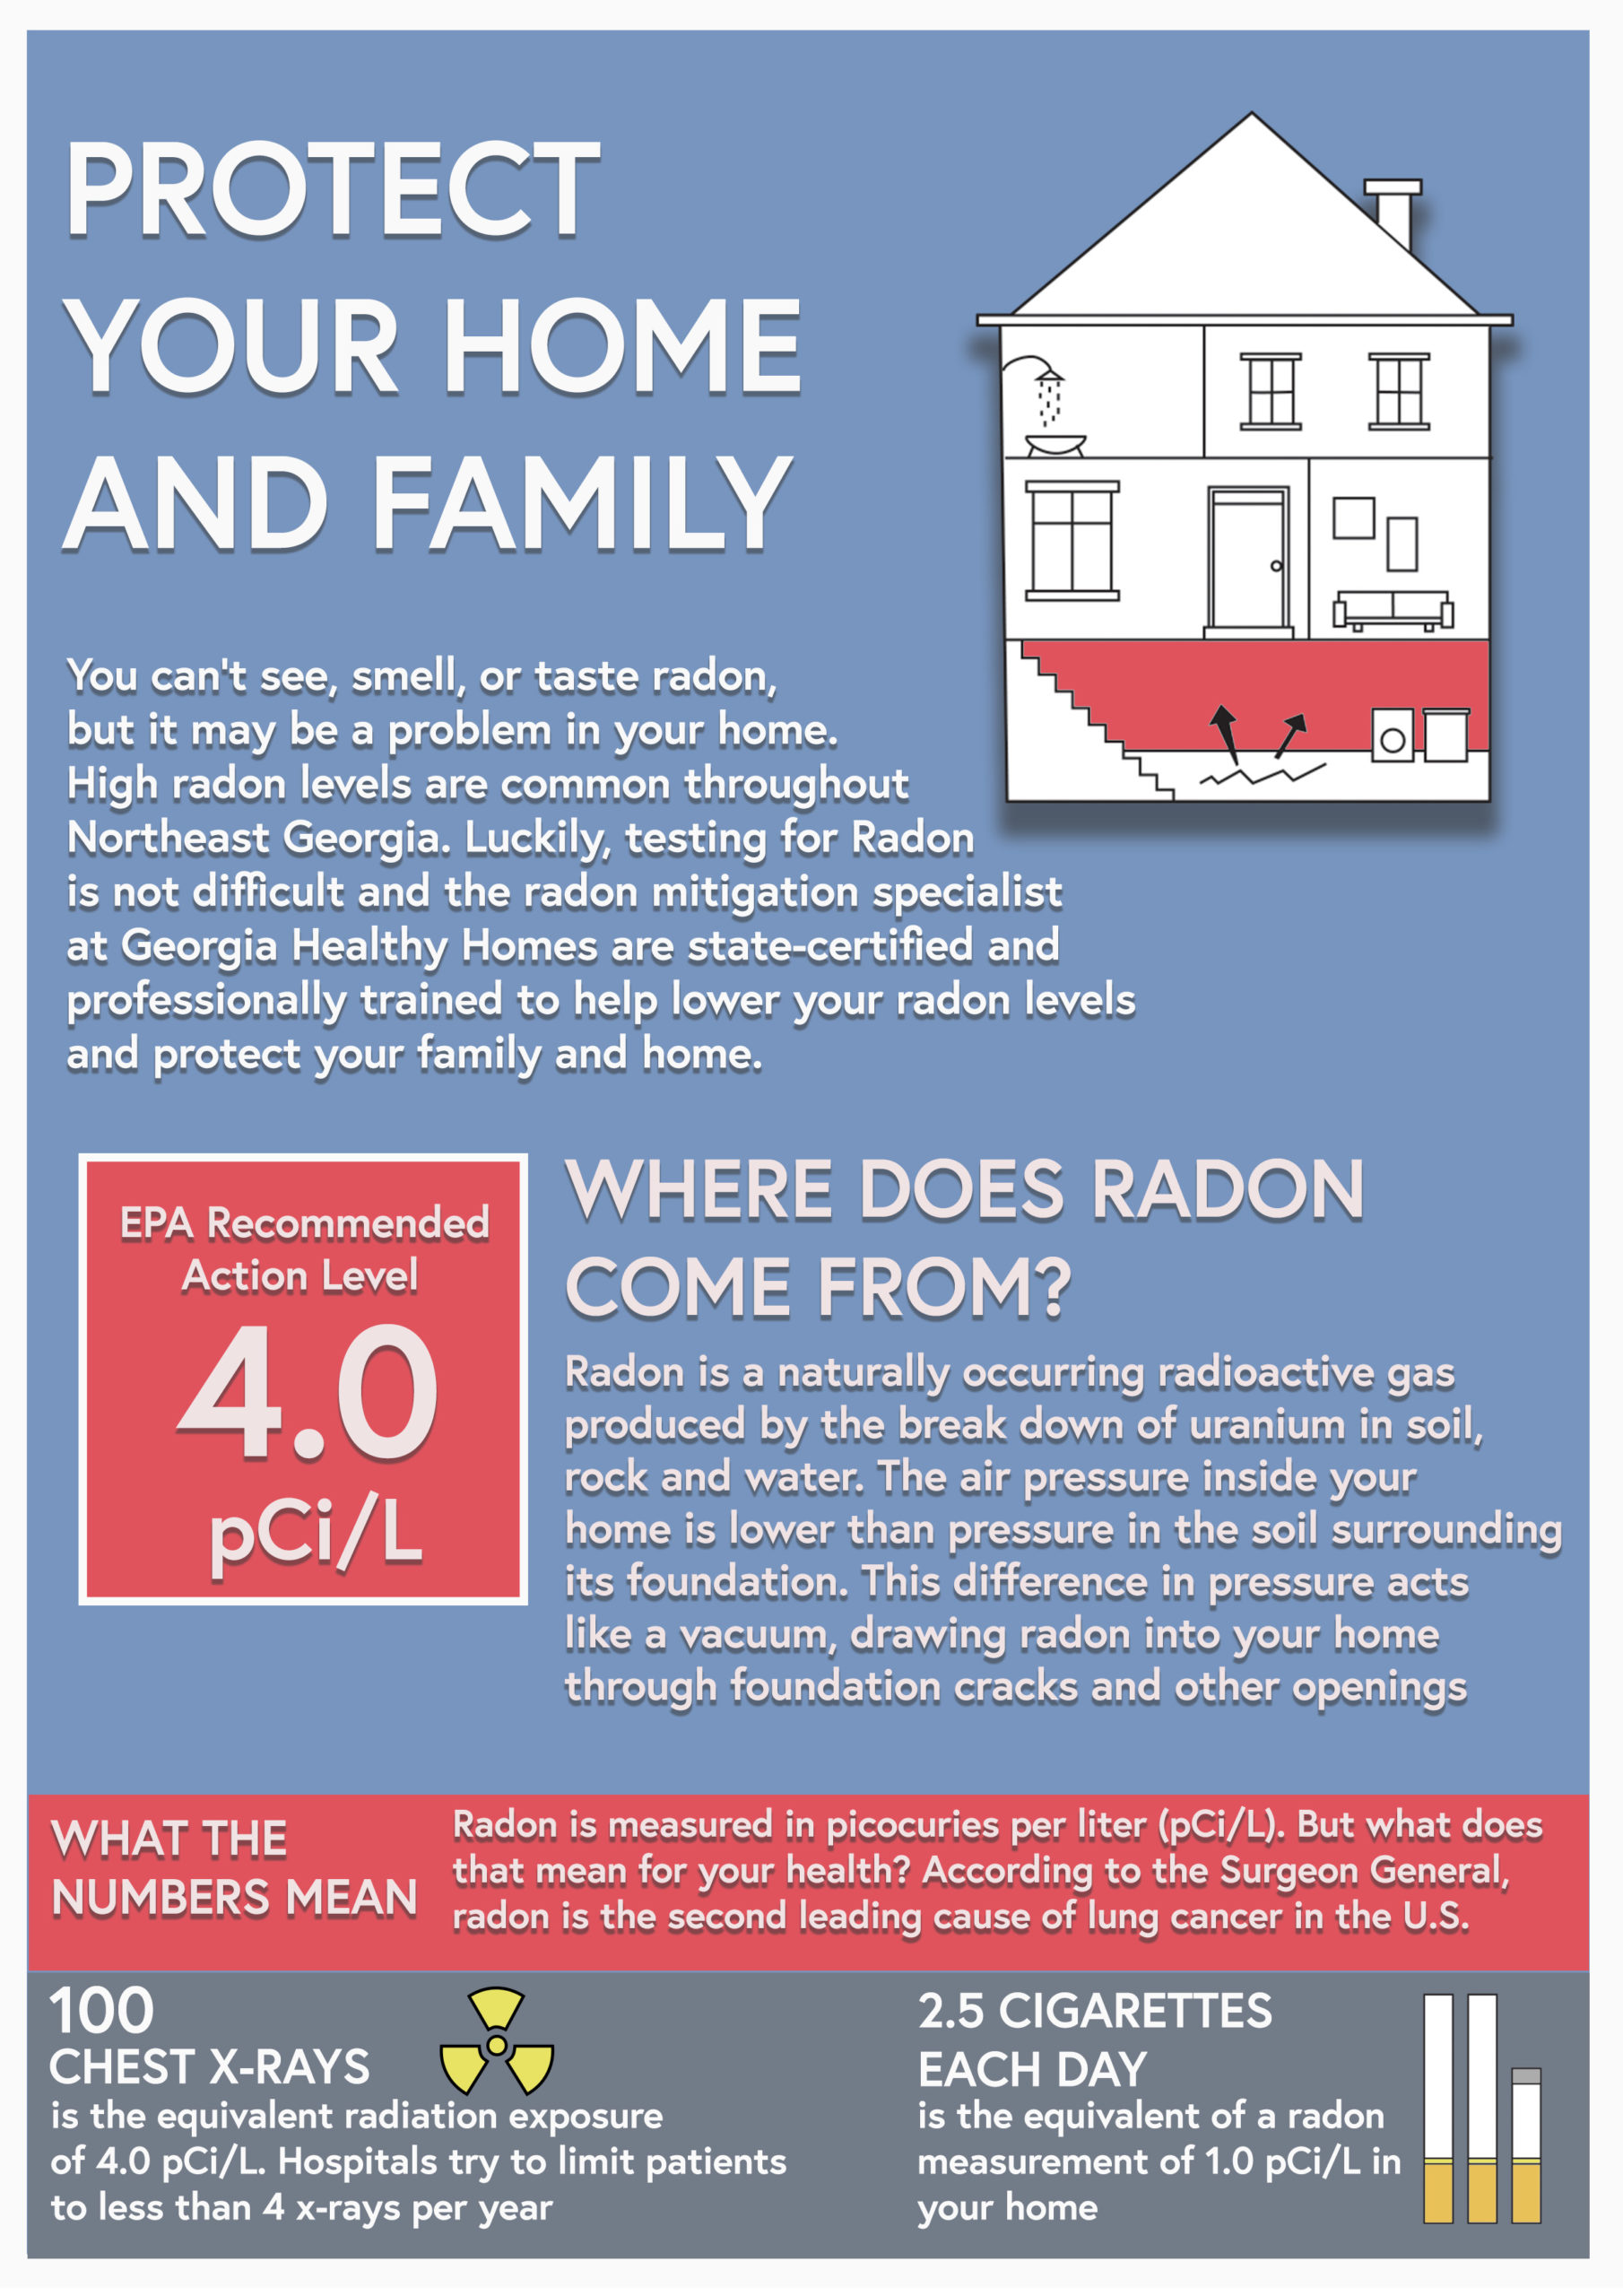 What every homeowner should know about radon